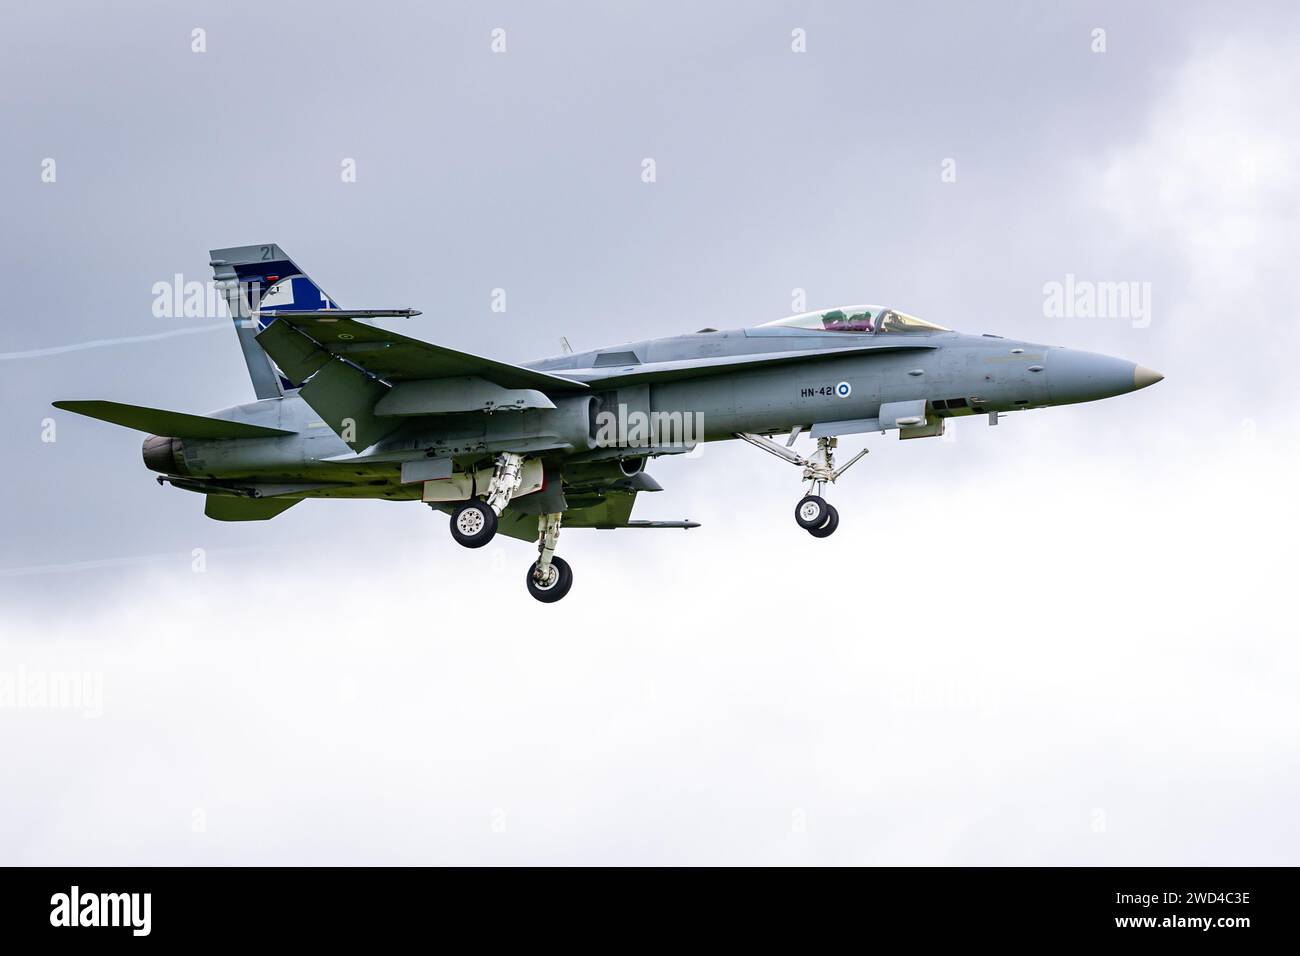 F18 McDonnell Douglas F/A-18C Operated by the Finnish air force - Fighter jet landing on runway with wheels deployed. Stock Photo